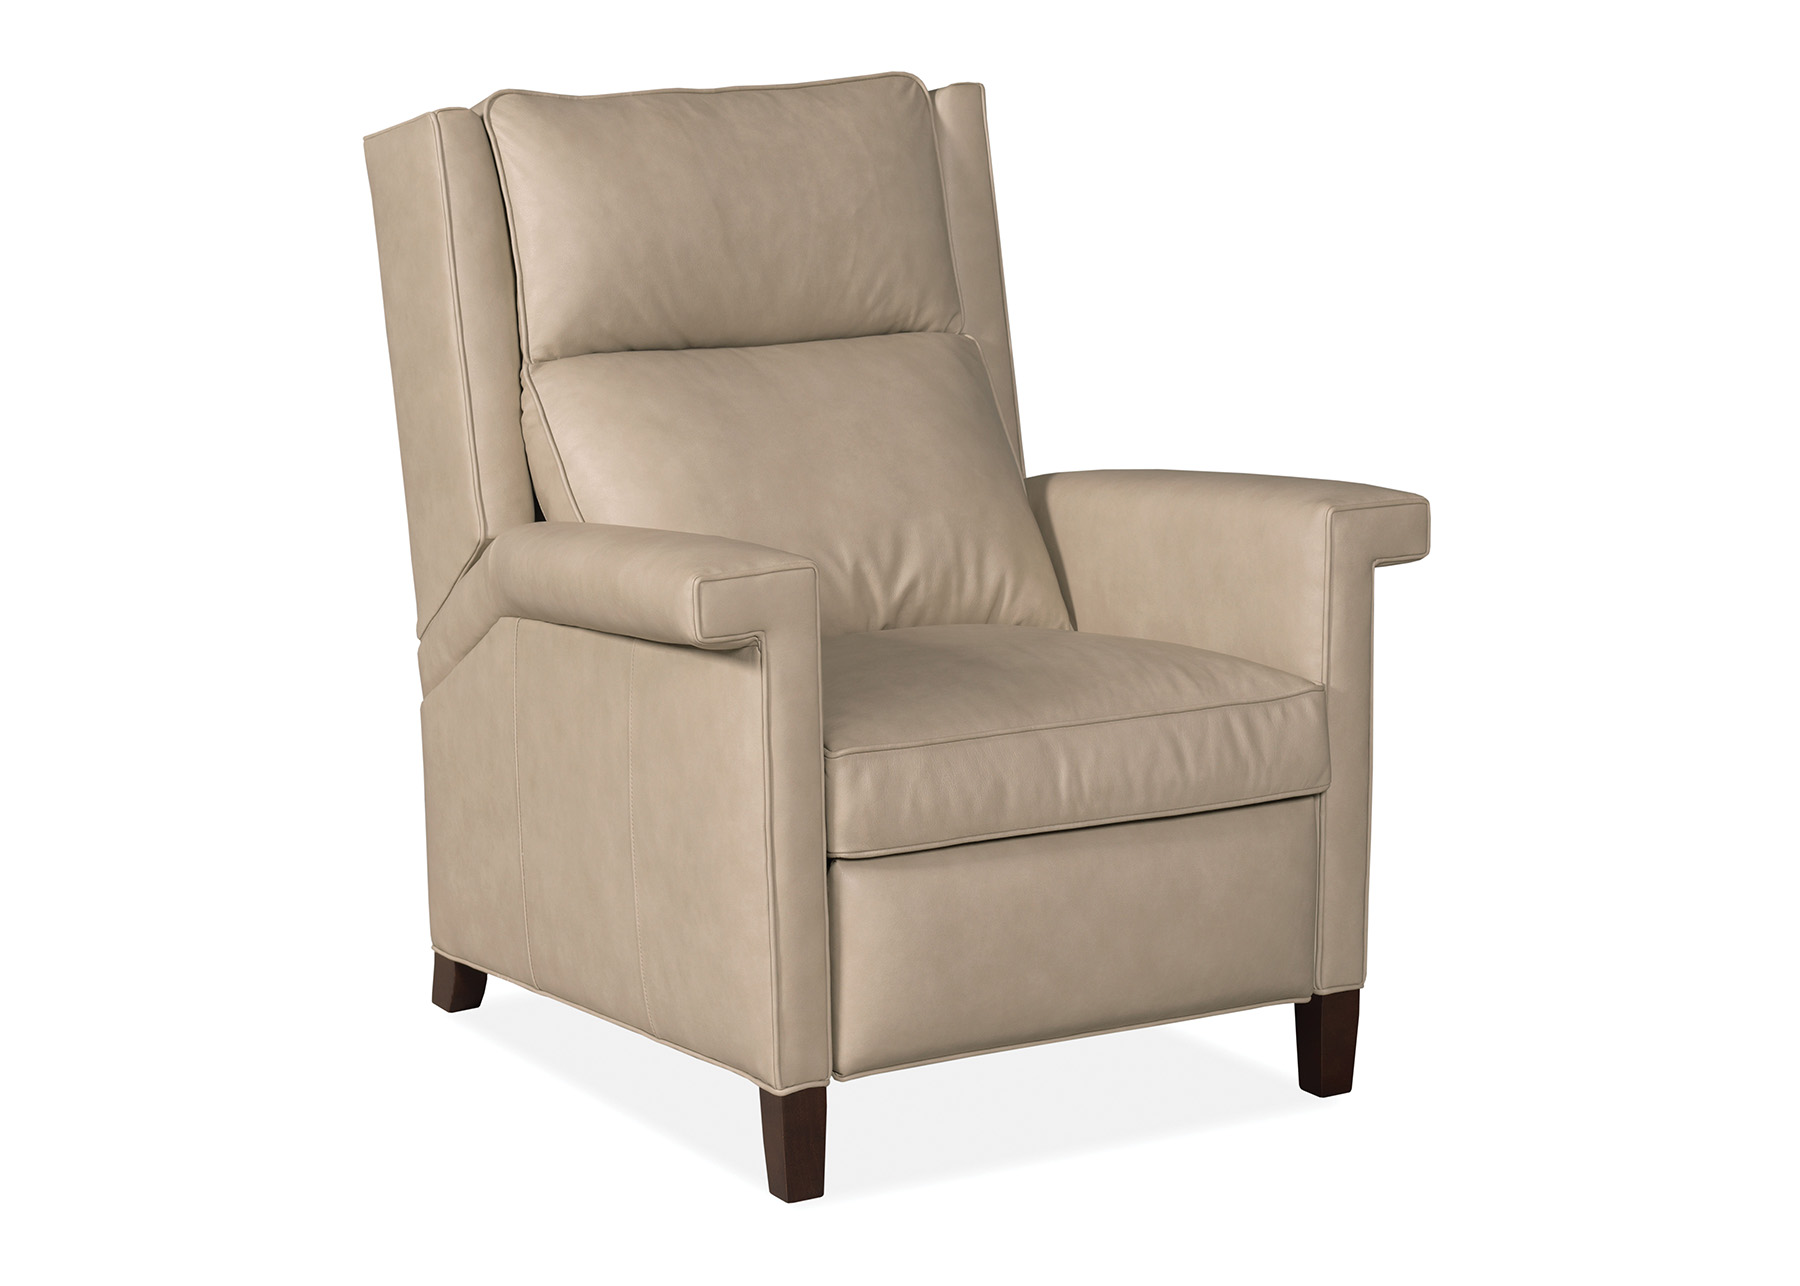 APOLLO POWER RECLINER WITH BATTERY